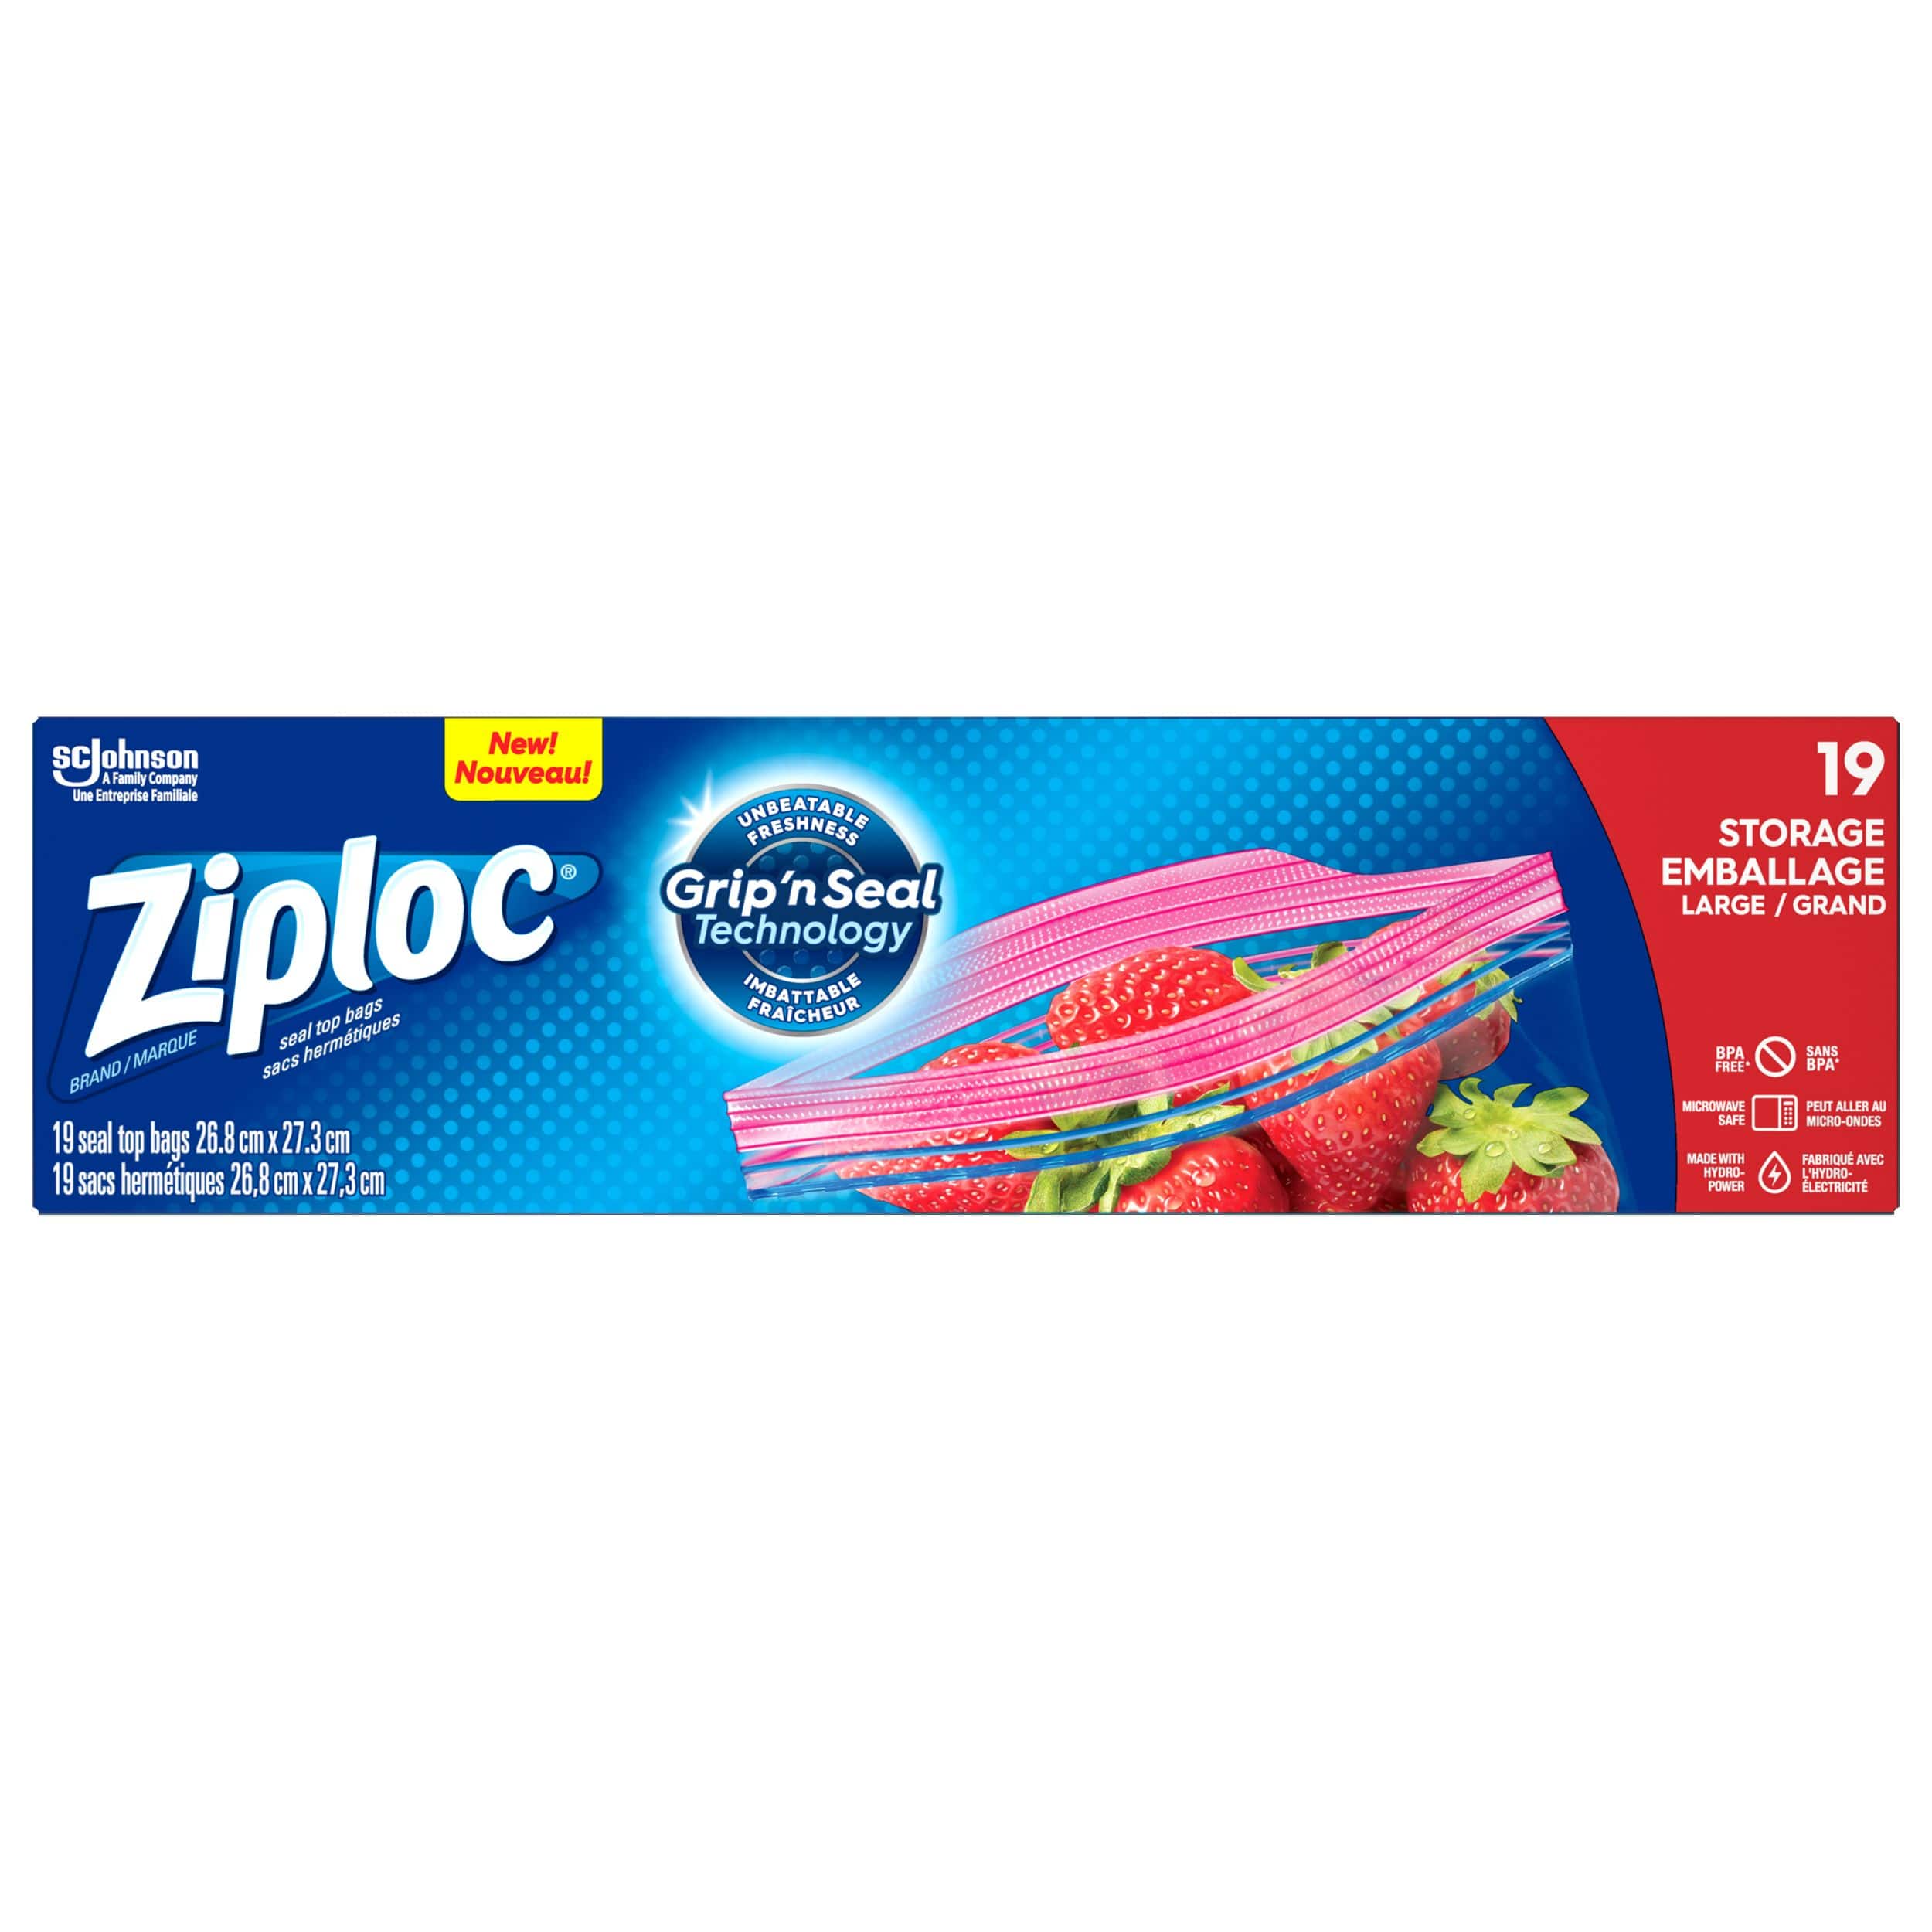 https://media-www.canadiantire.ca/product/living/home-essentials/household-consumables/0530224/ziploc-large-storage-bags-19ct-c64d9a80-3631-4dc7-b5a7-4be443479d85-jpgrendition.jpg